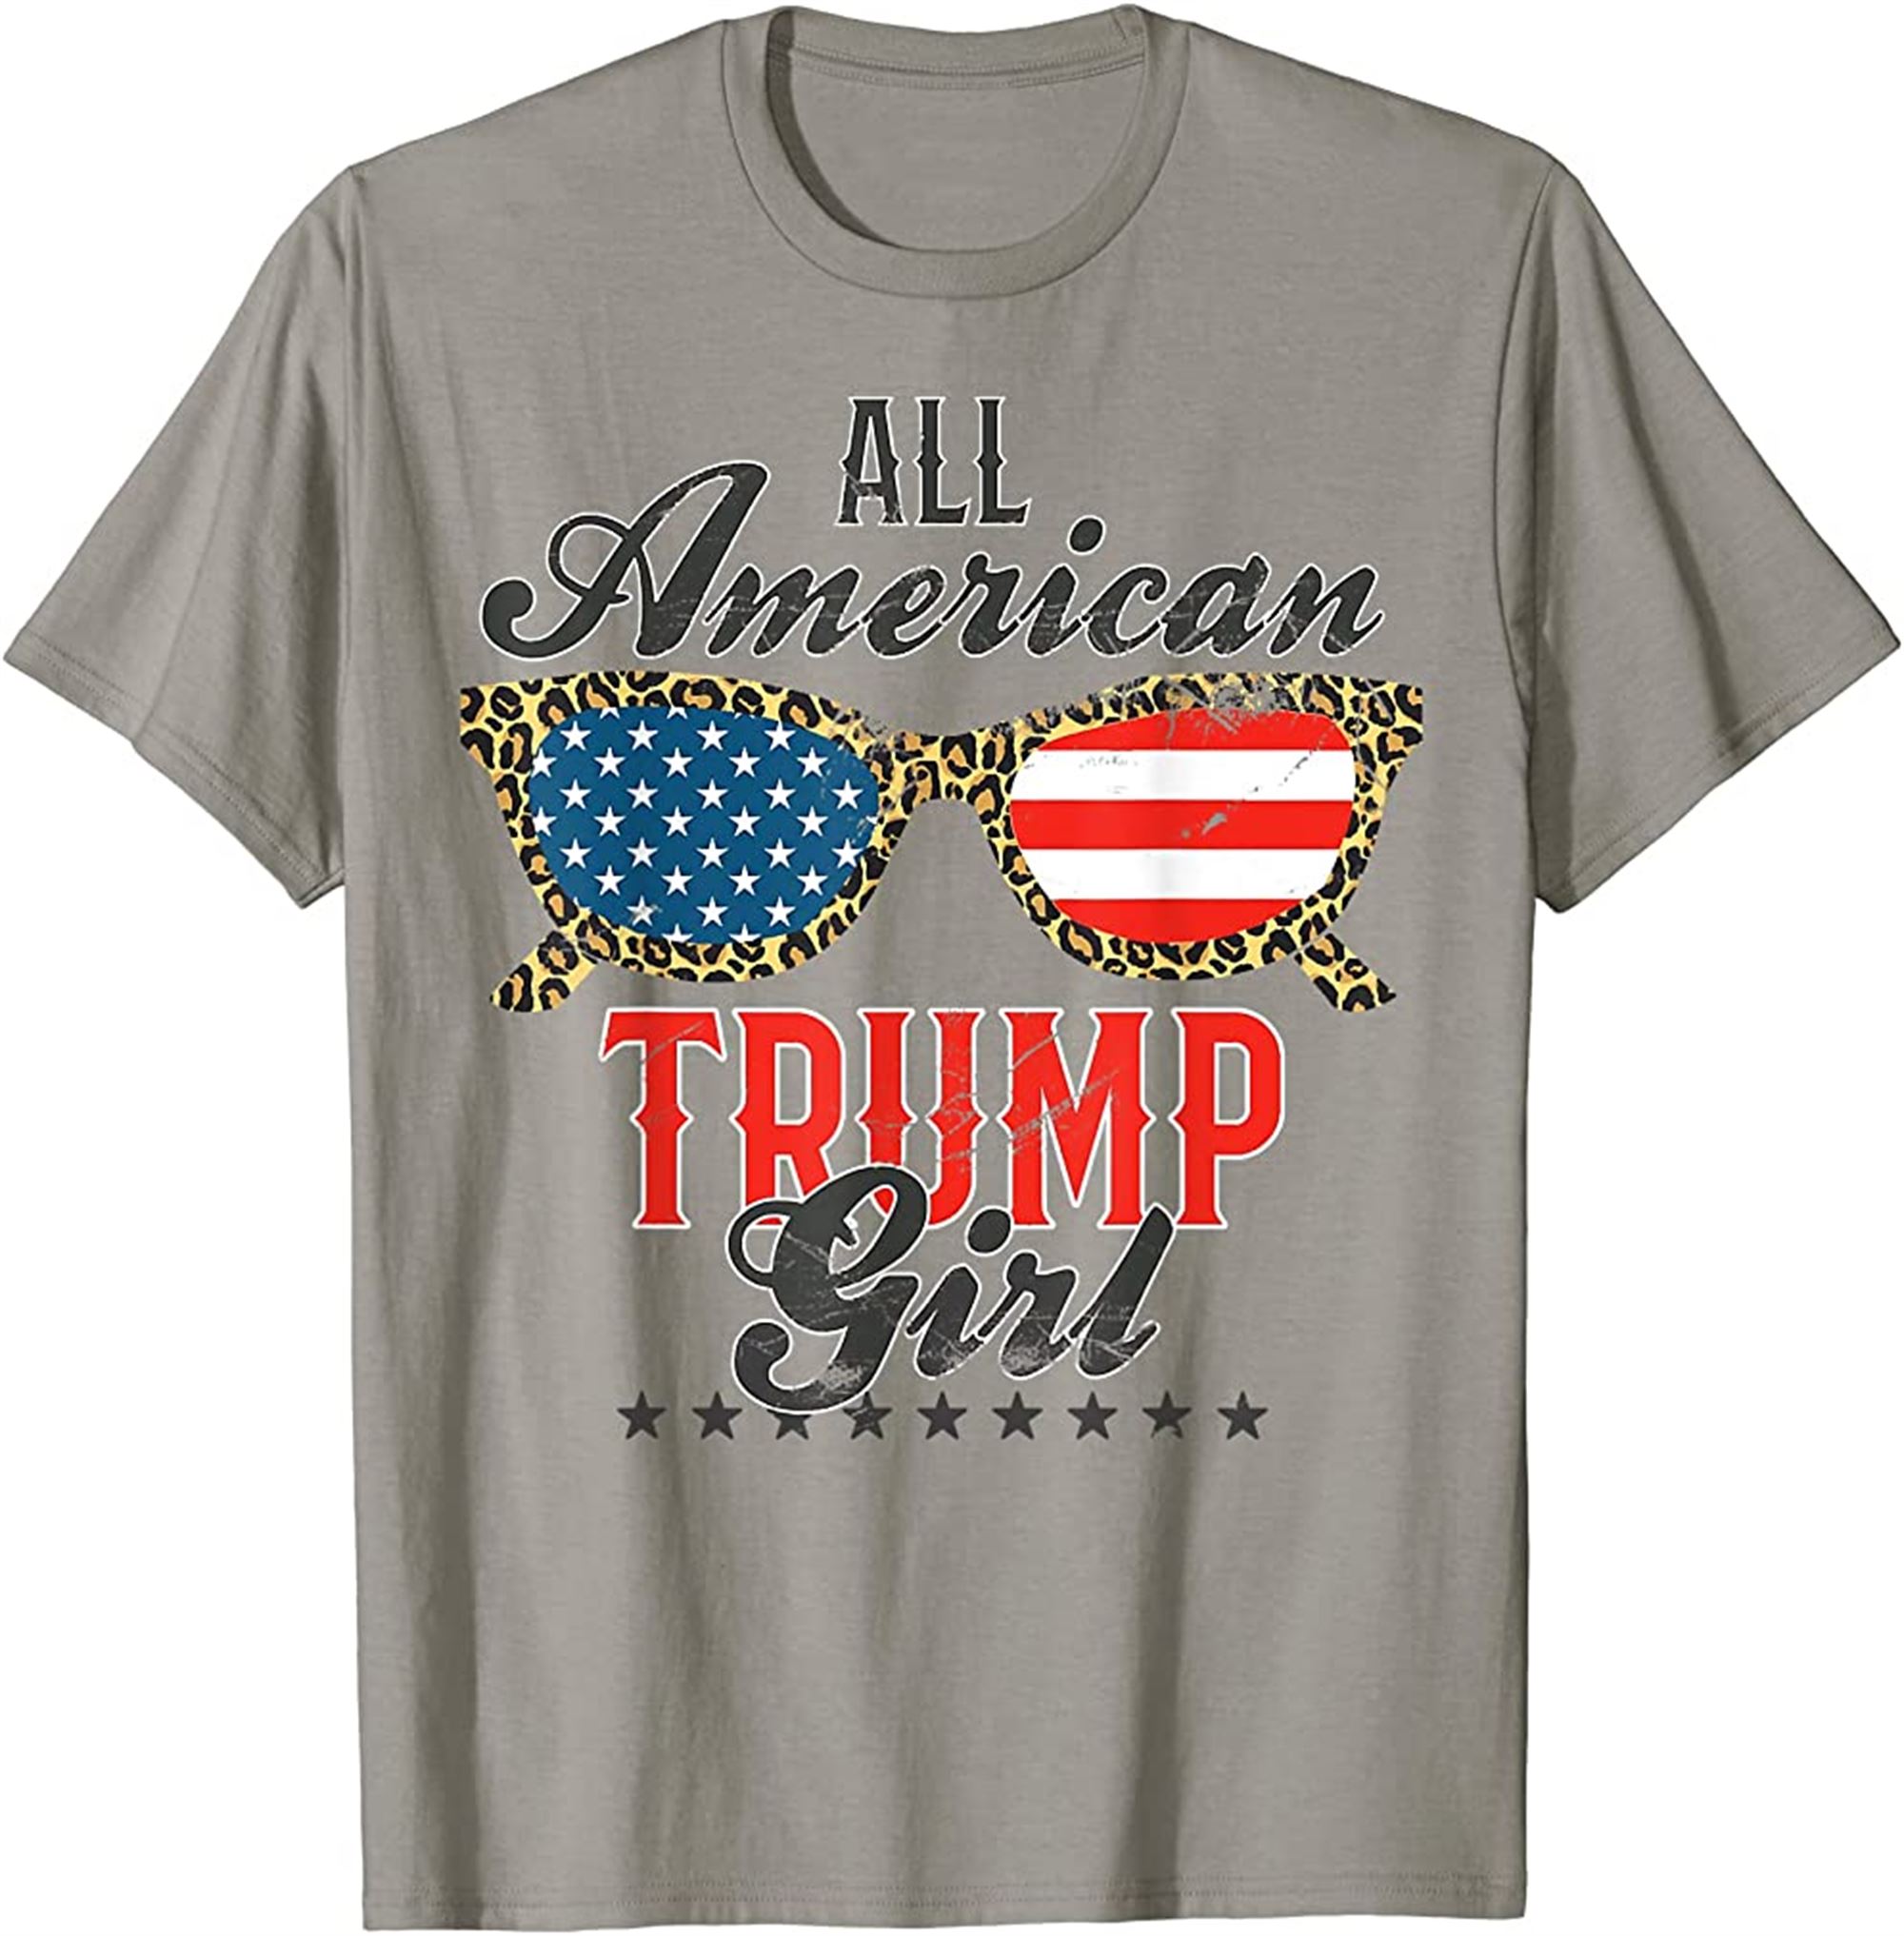 Trump Girl 2021 4th July T-shirt Plus Size Up To 5xl